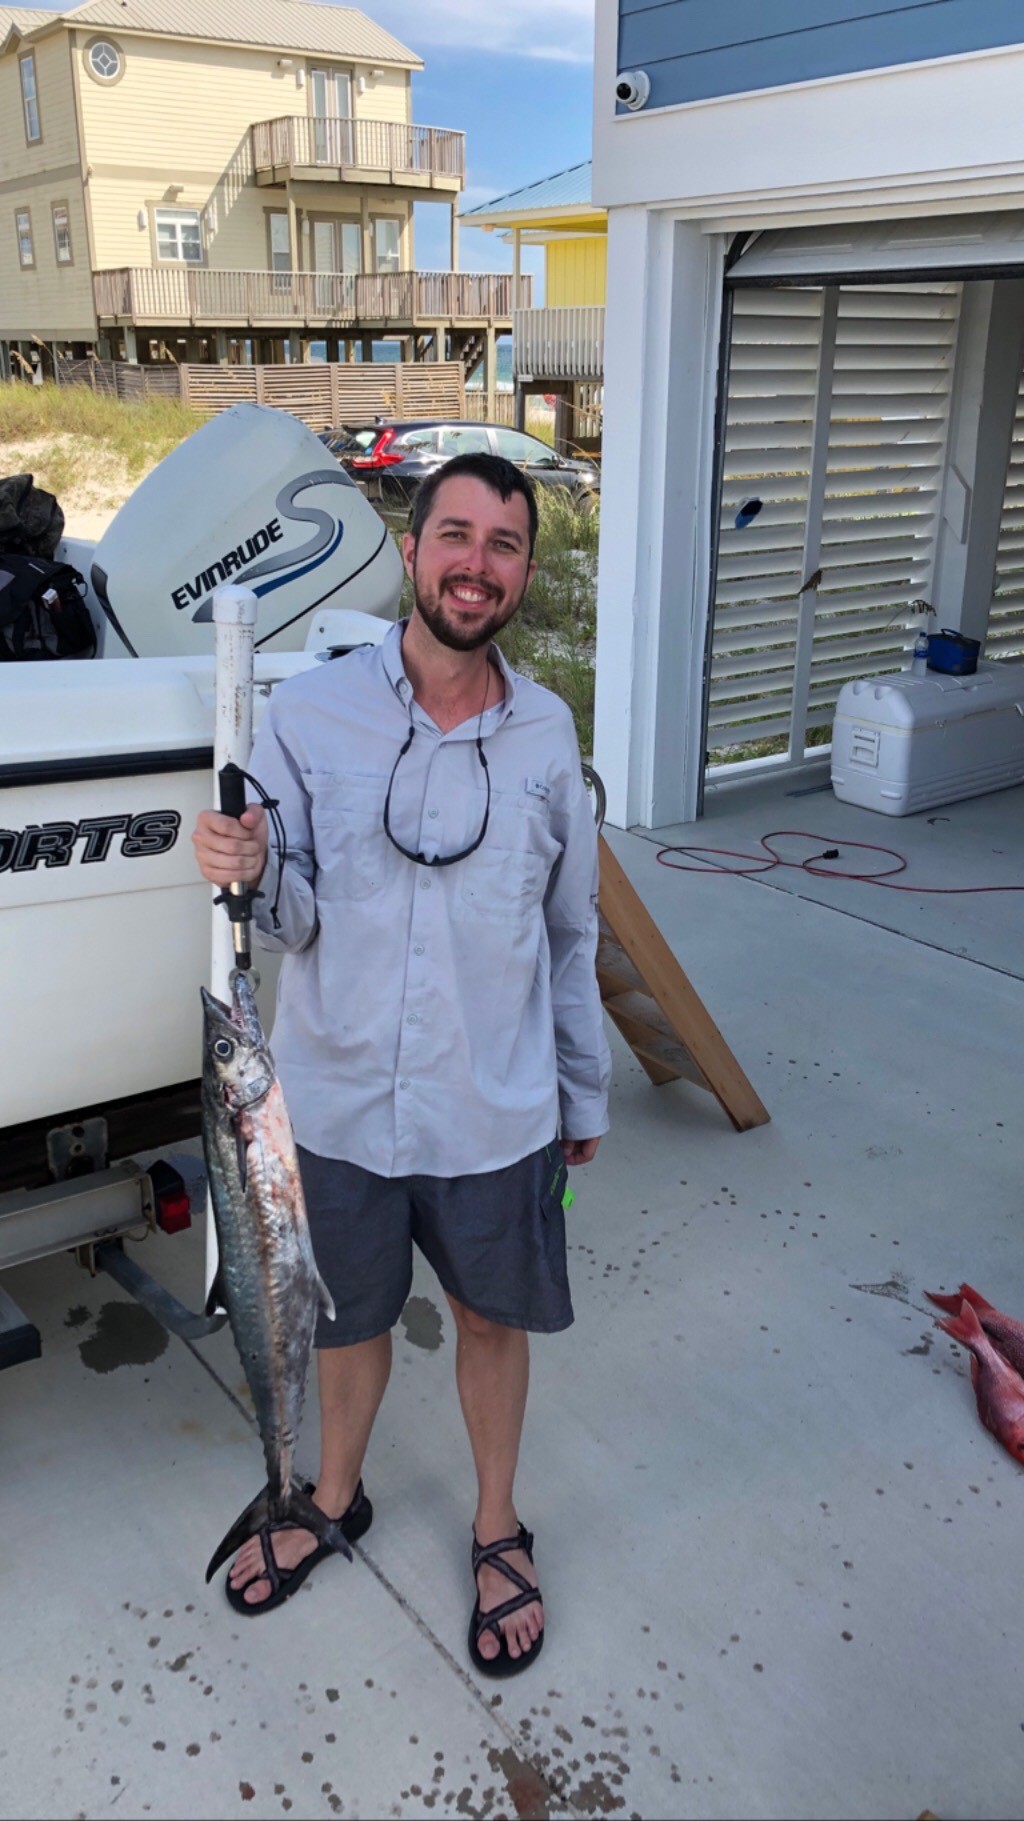 Jordan Bell, a research scientist at NASA’s Marshall Space Flight Center, stands by a boat in a driveway with a fish he caught in his hand.